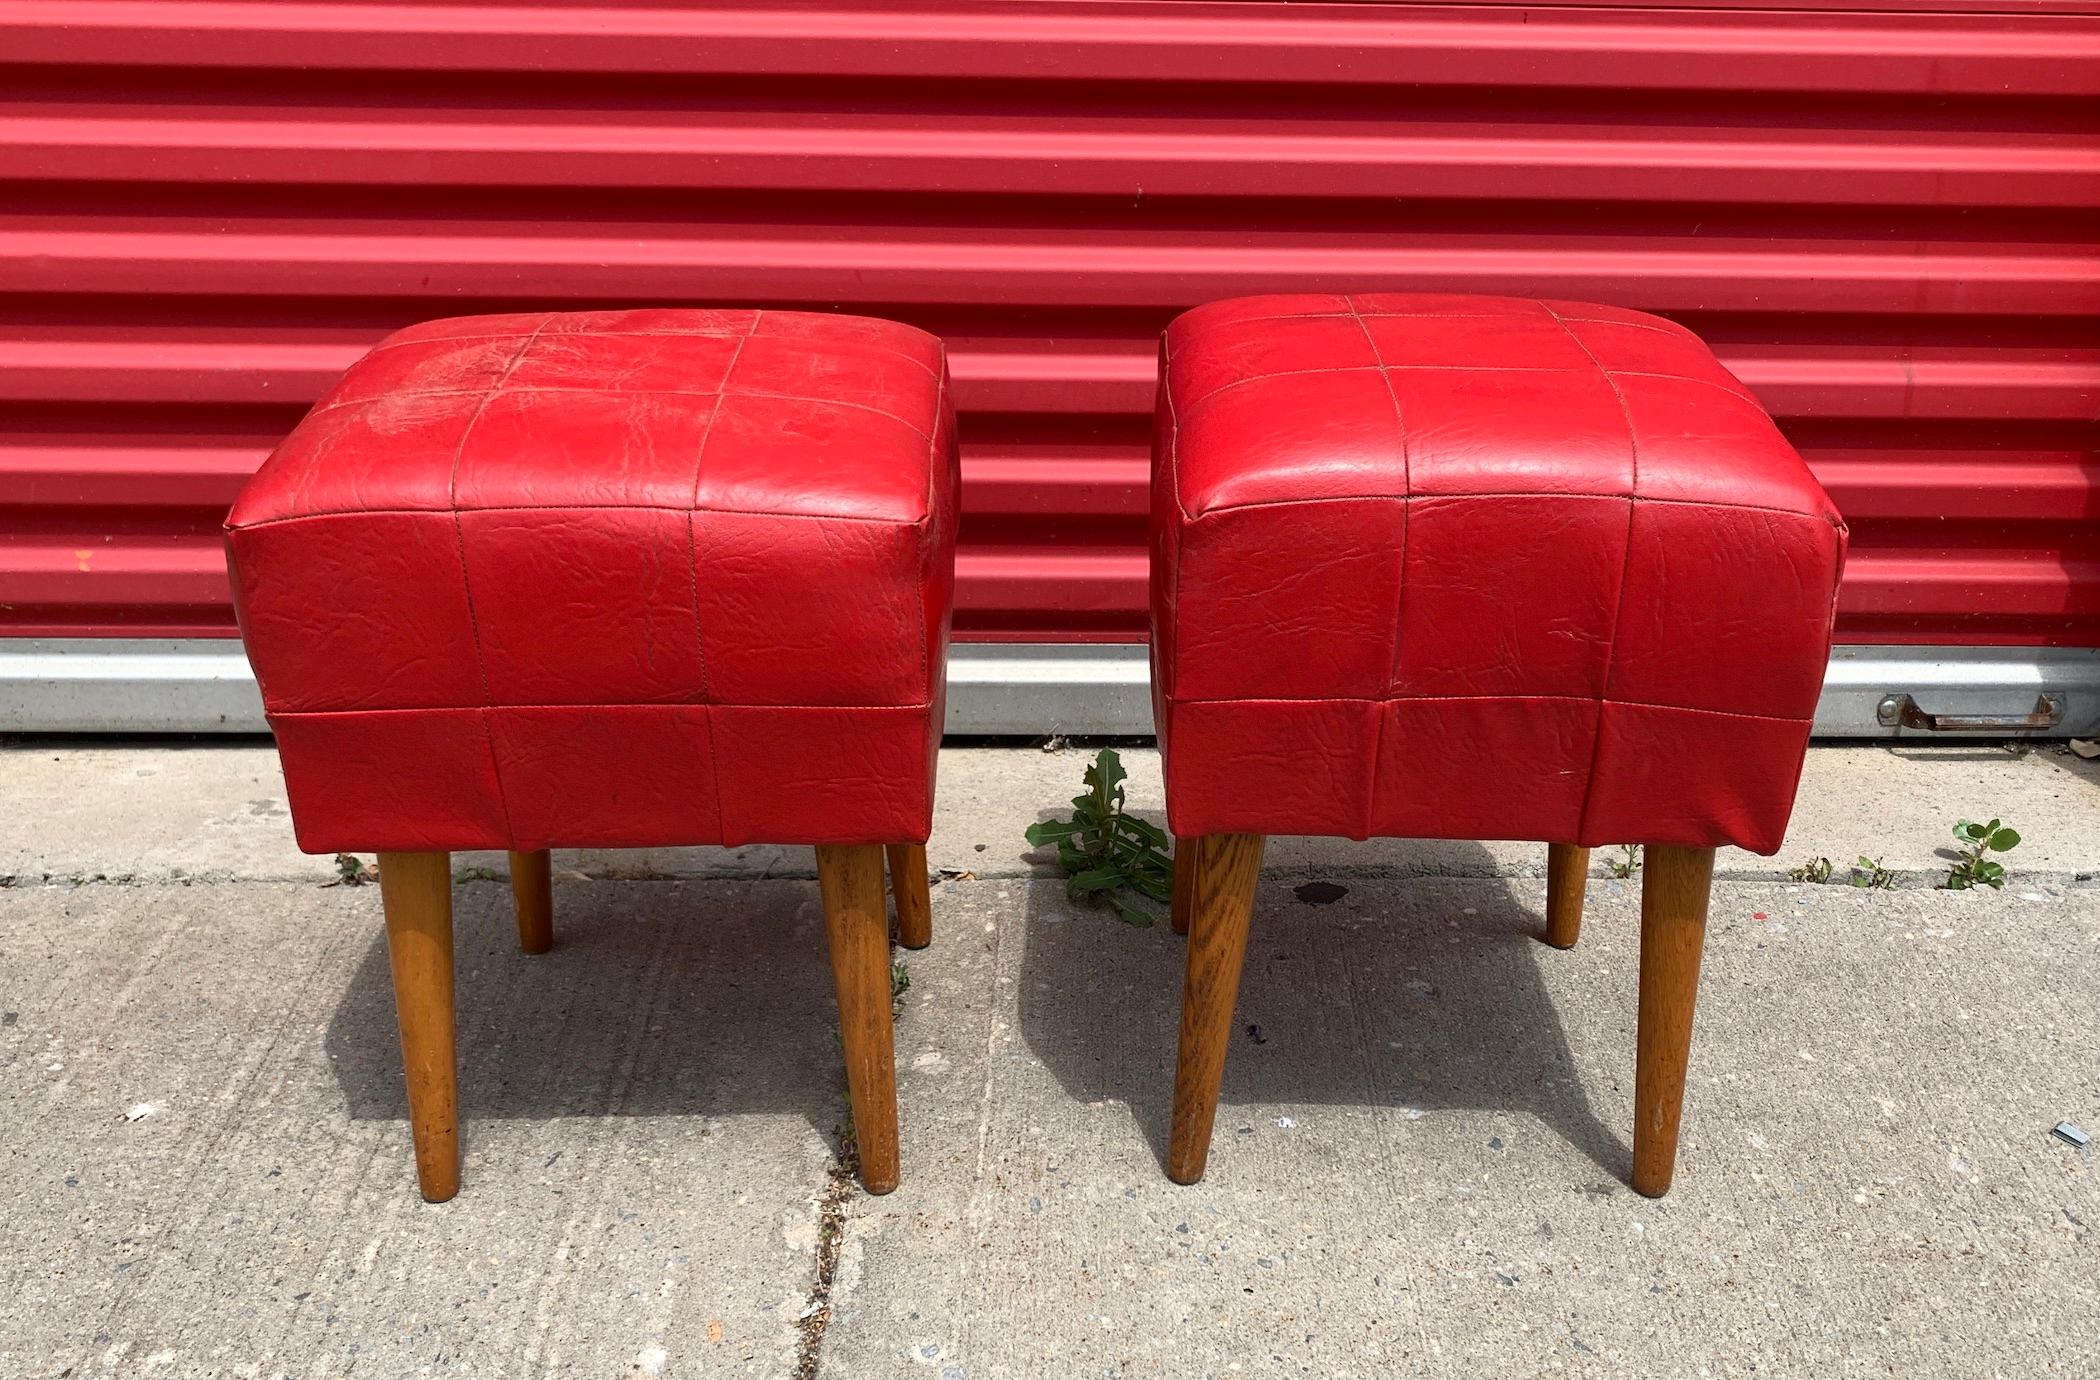 This pair of vivid red midcentury leather ottomans if the perfect pop of color. A great height to lay your tired feet or sit while entertaining. Durable leather that with stand the ages and will hold for more years to come.